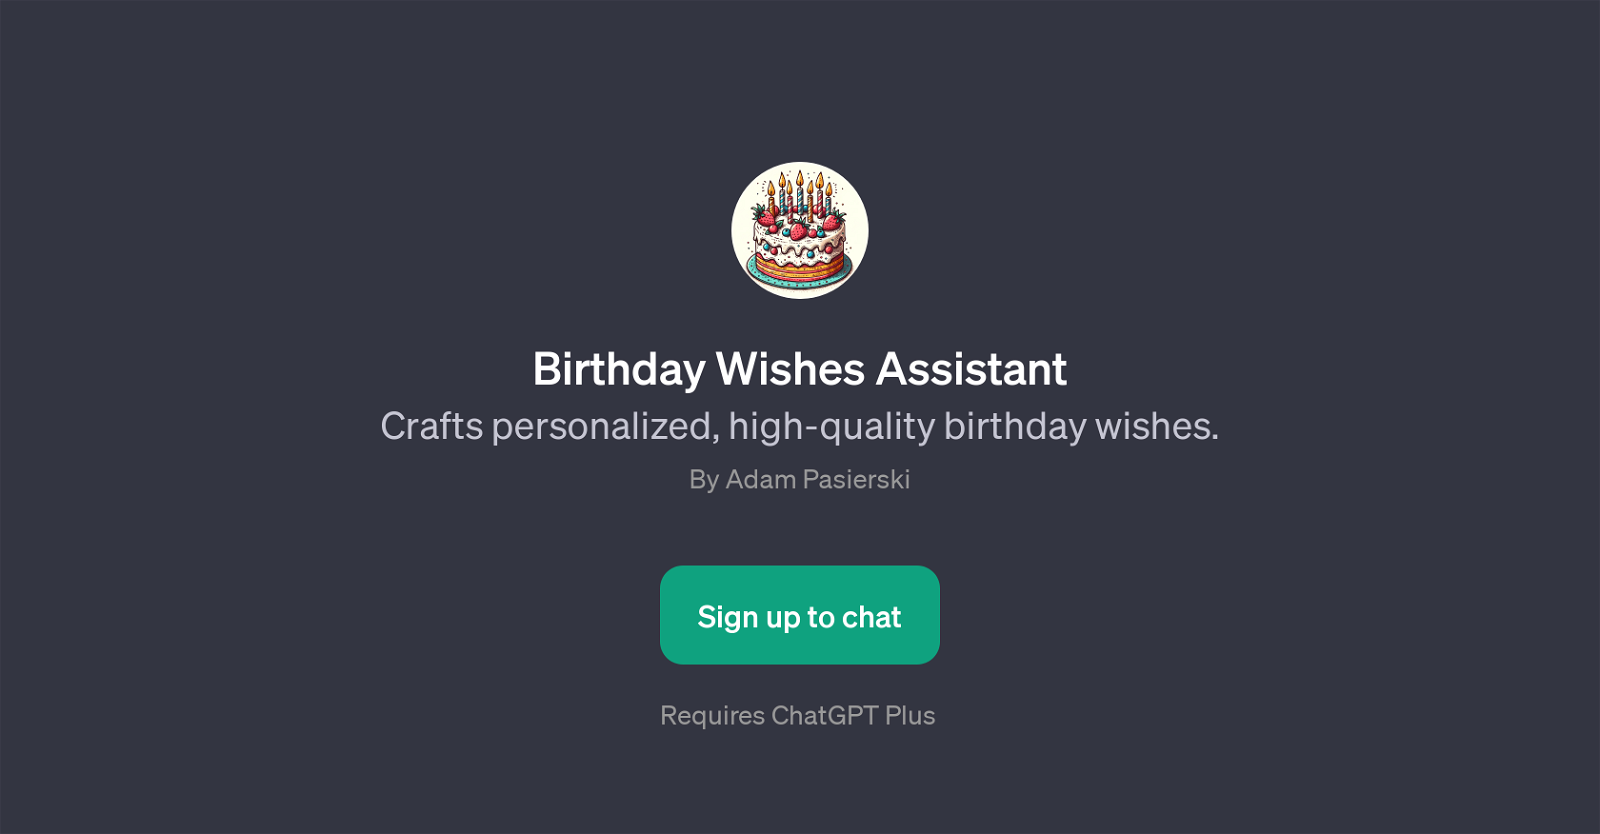 Birthday Wishes Assistant website